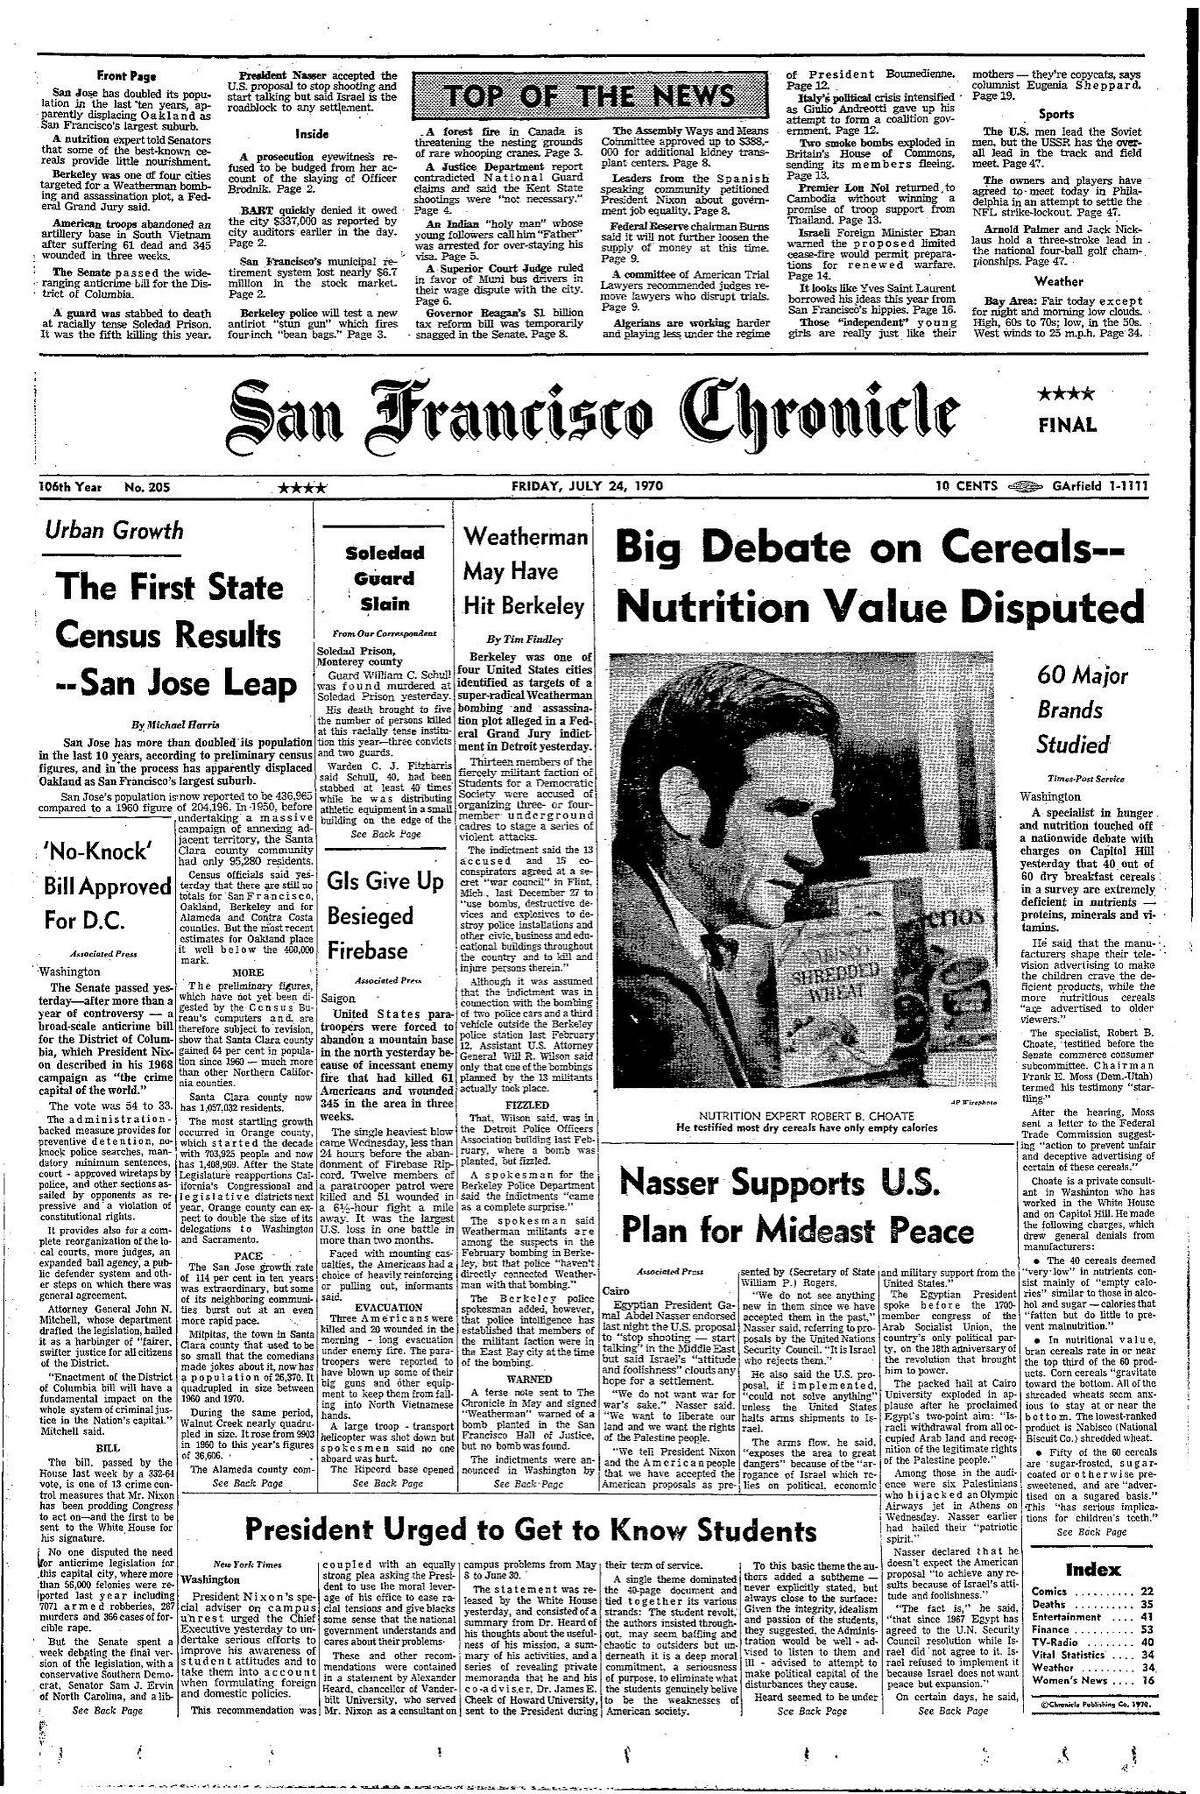 Historic Chronicle Front Page July 24, 1970 Report comes out, that breakfast cereal isn't all that healthy, and are extremely deficient in nutrients Chron365, Chroncover